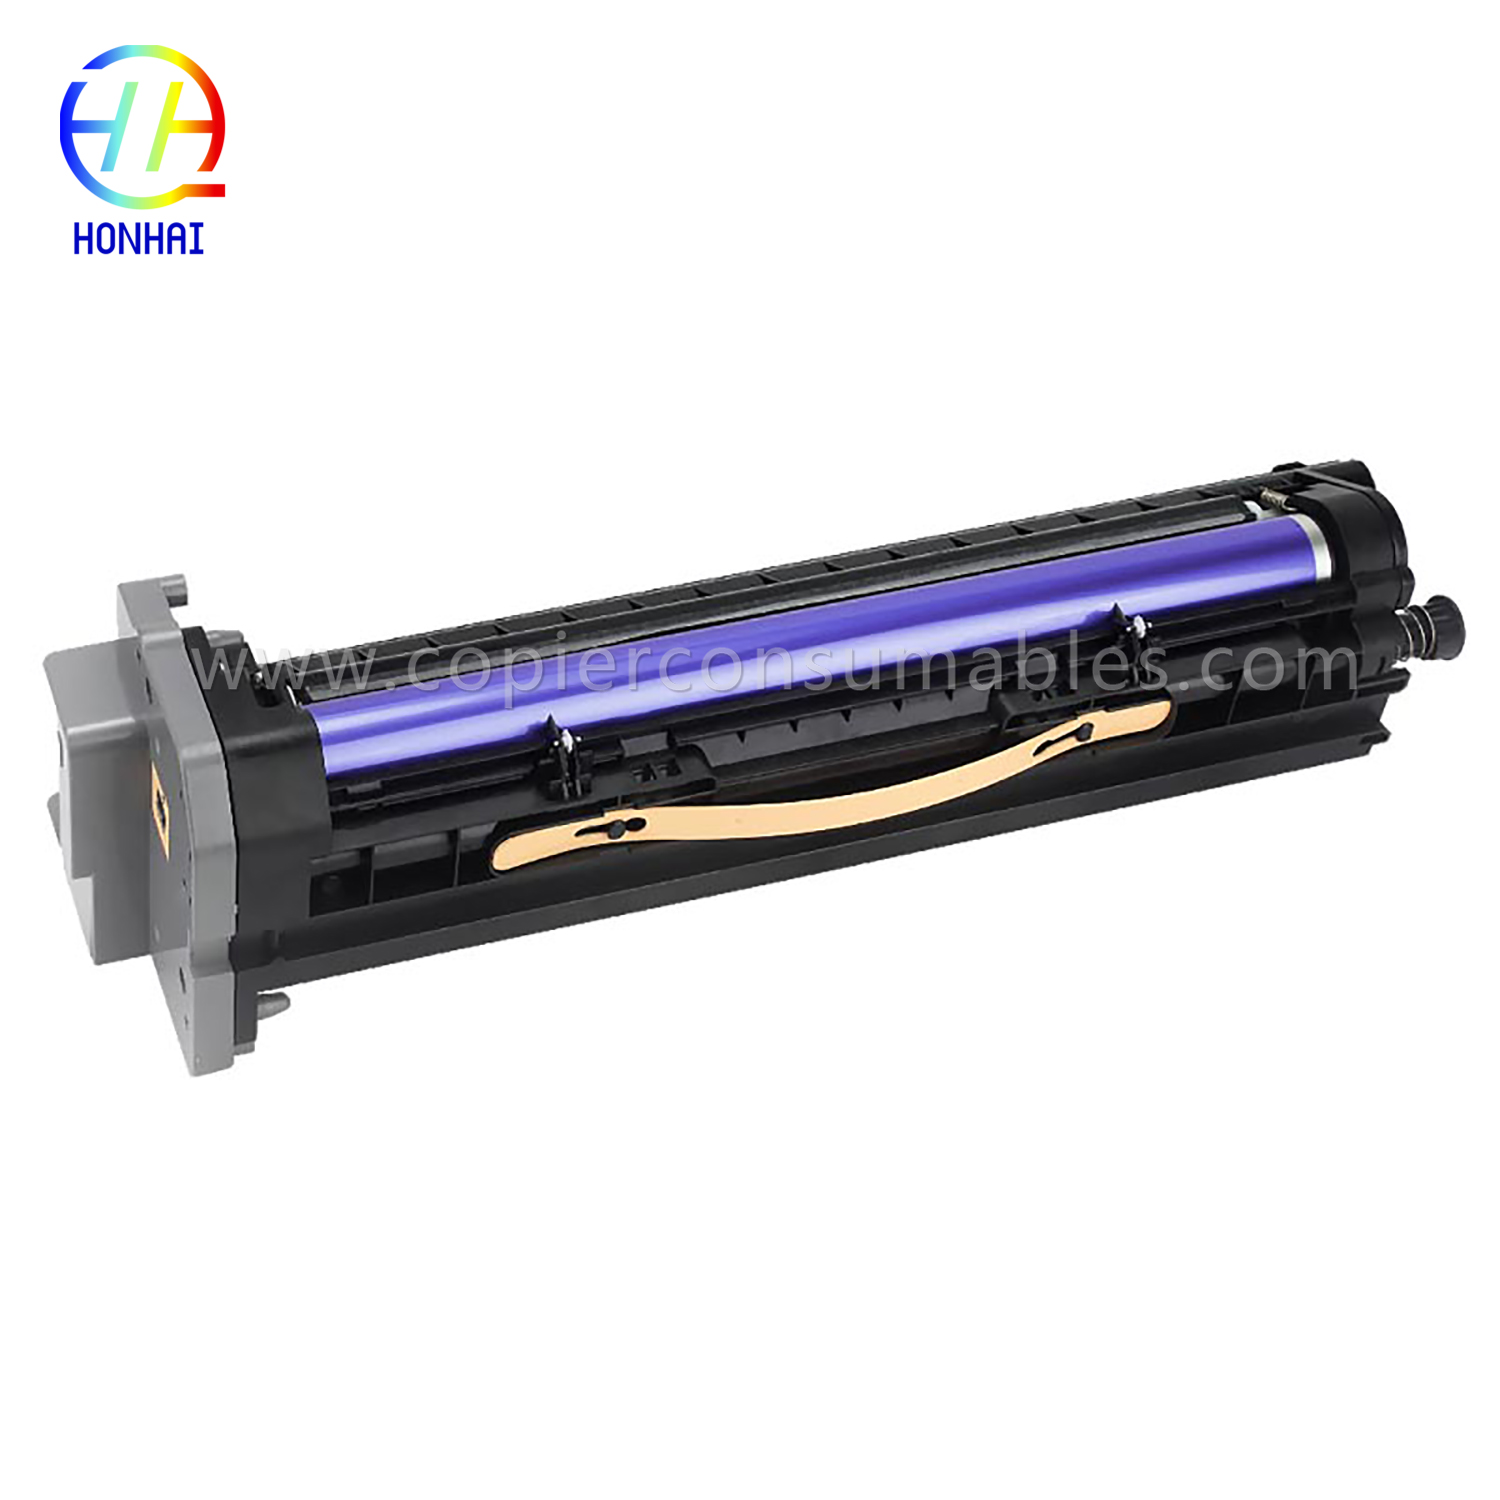 Drum Unit for Xerox Dcc2060 Wc5330 Wc5335 Wc5220 拷贝